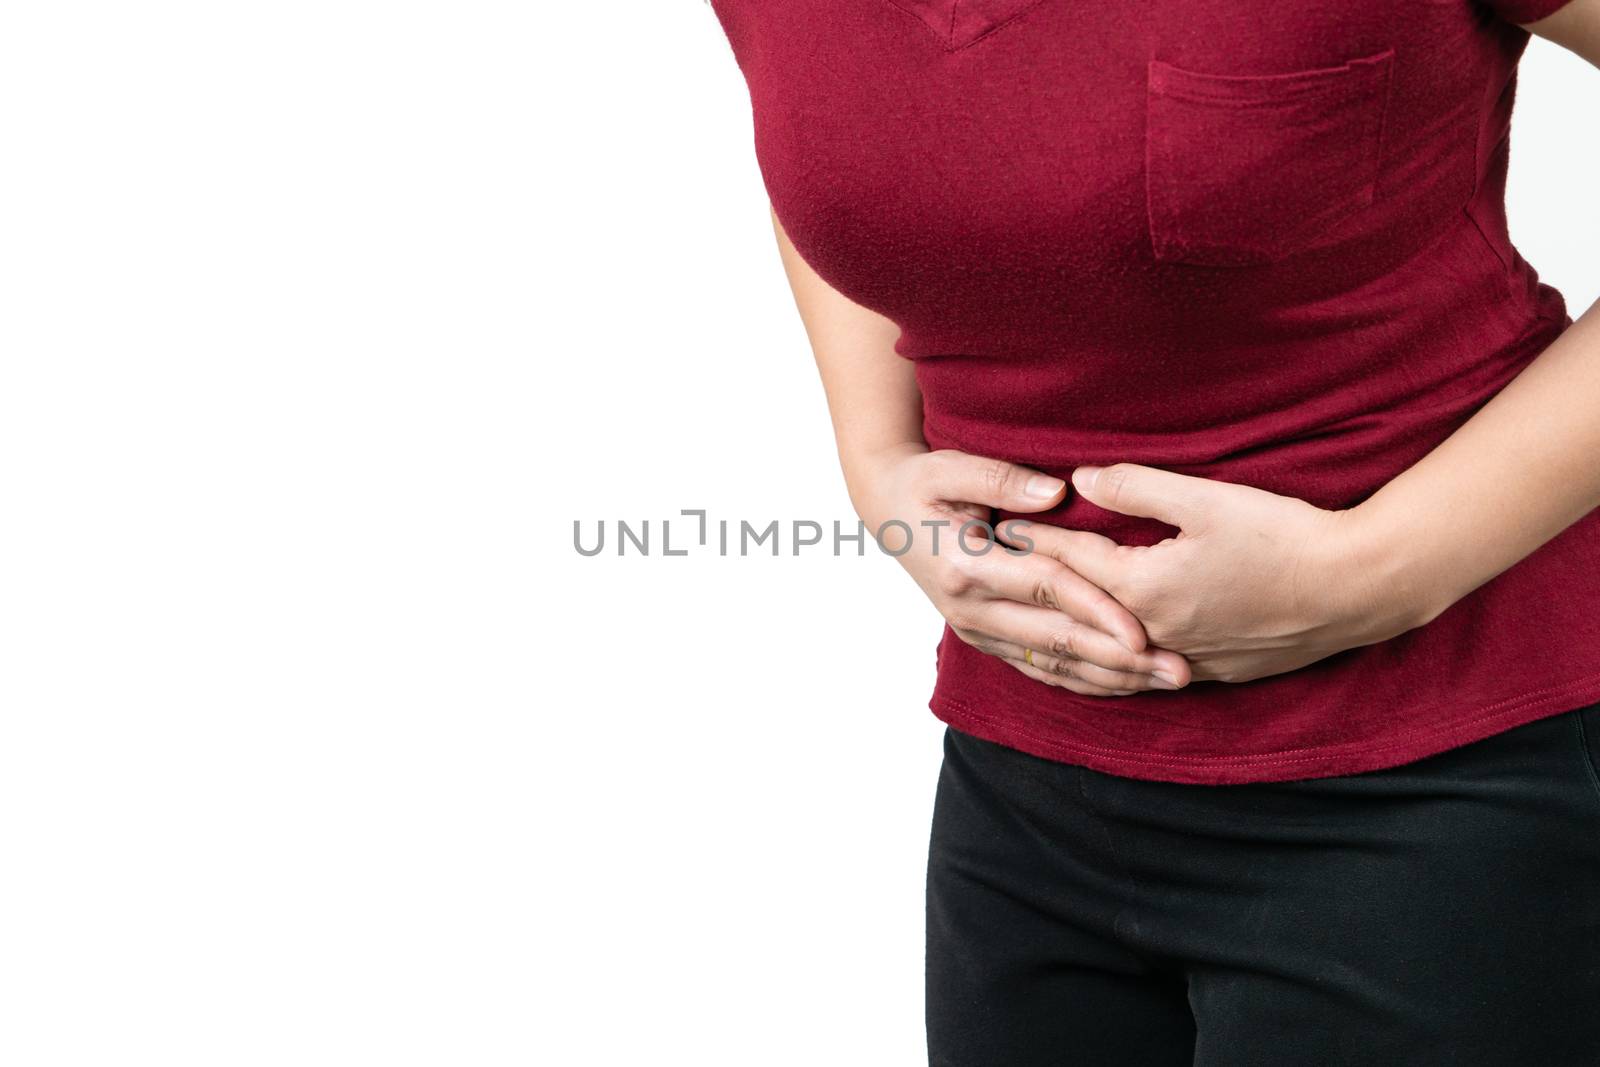 stomachache, young woman suffering from abdominal pain feeling s by psodaz